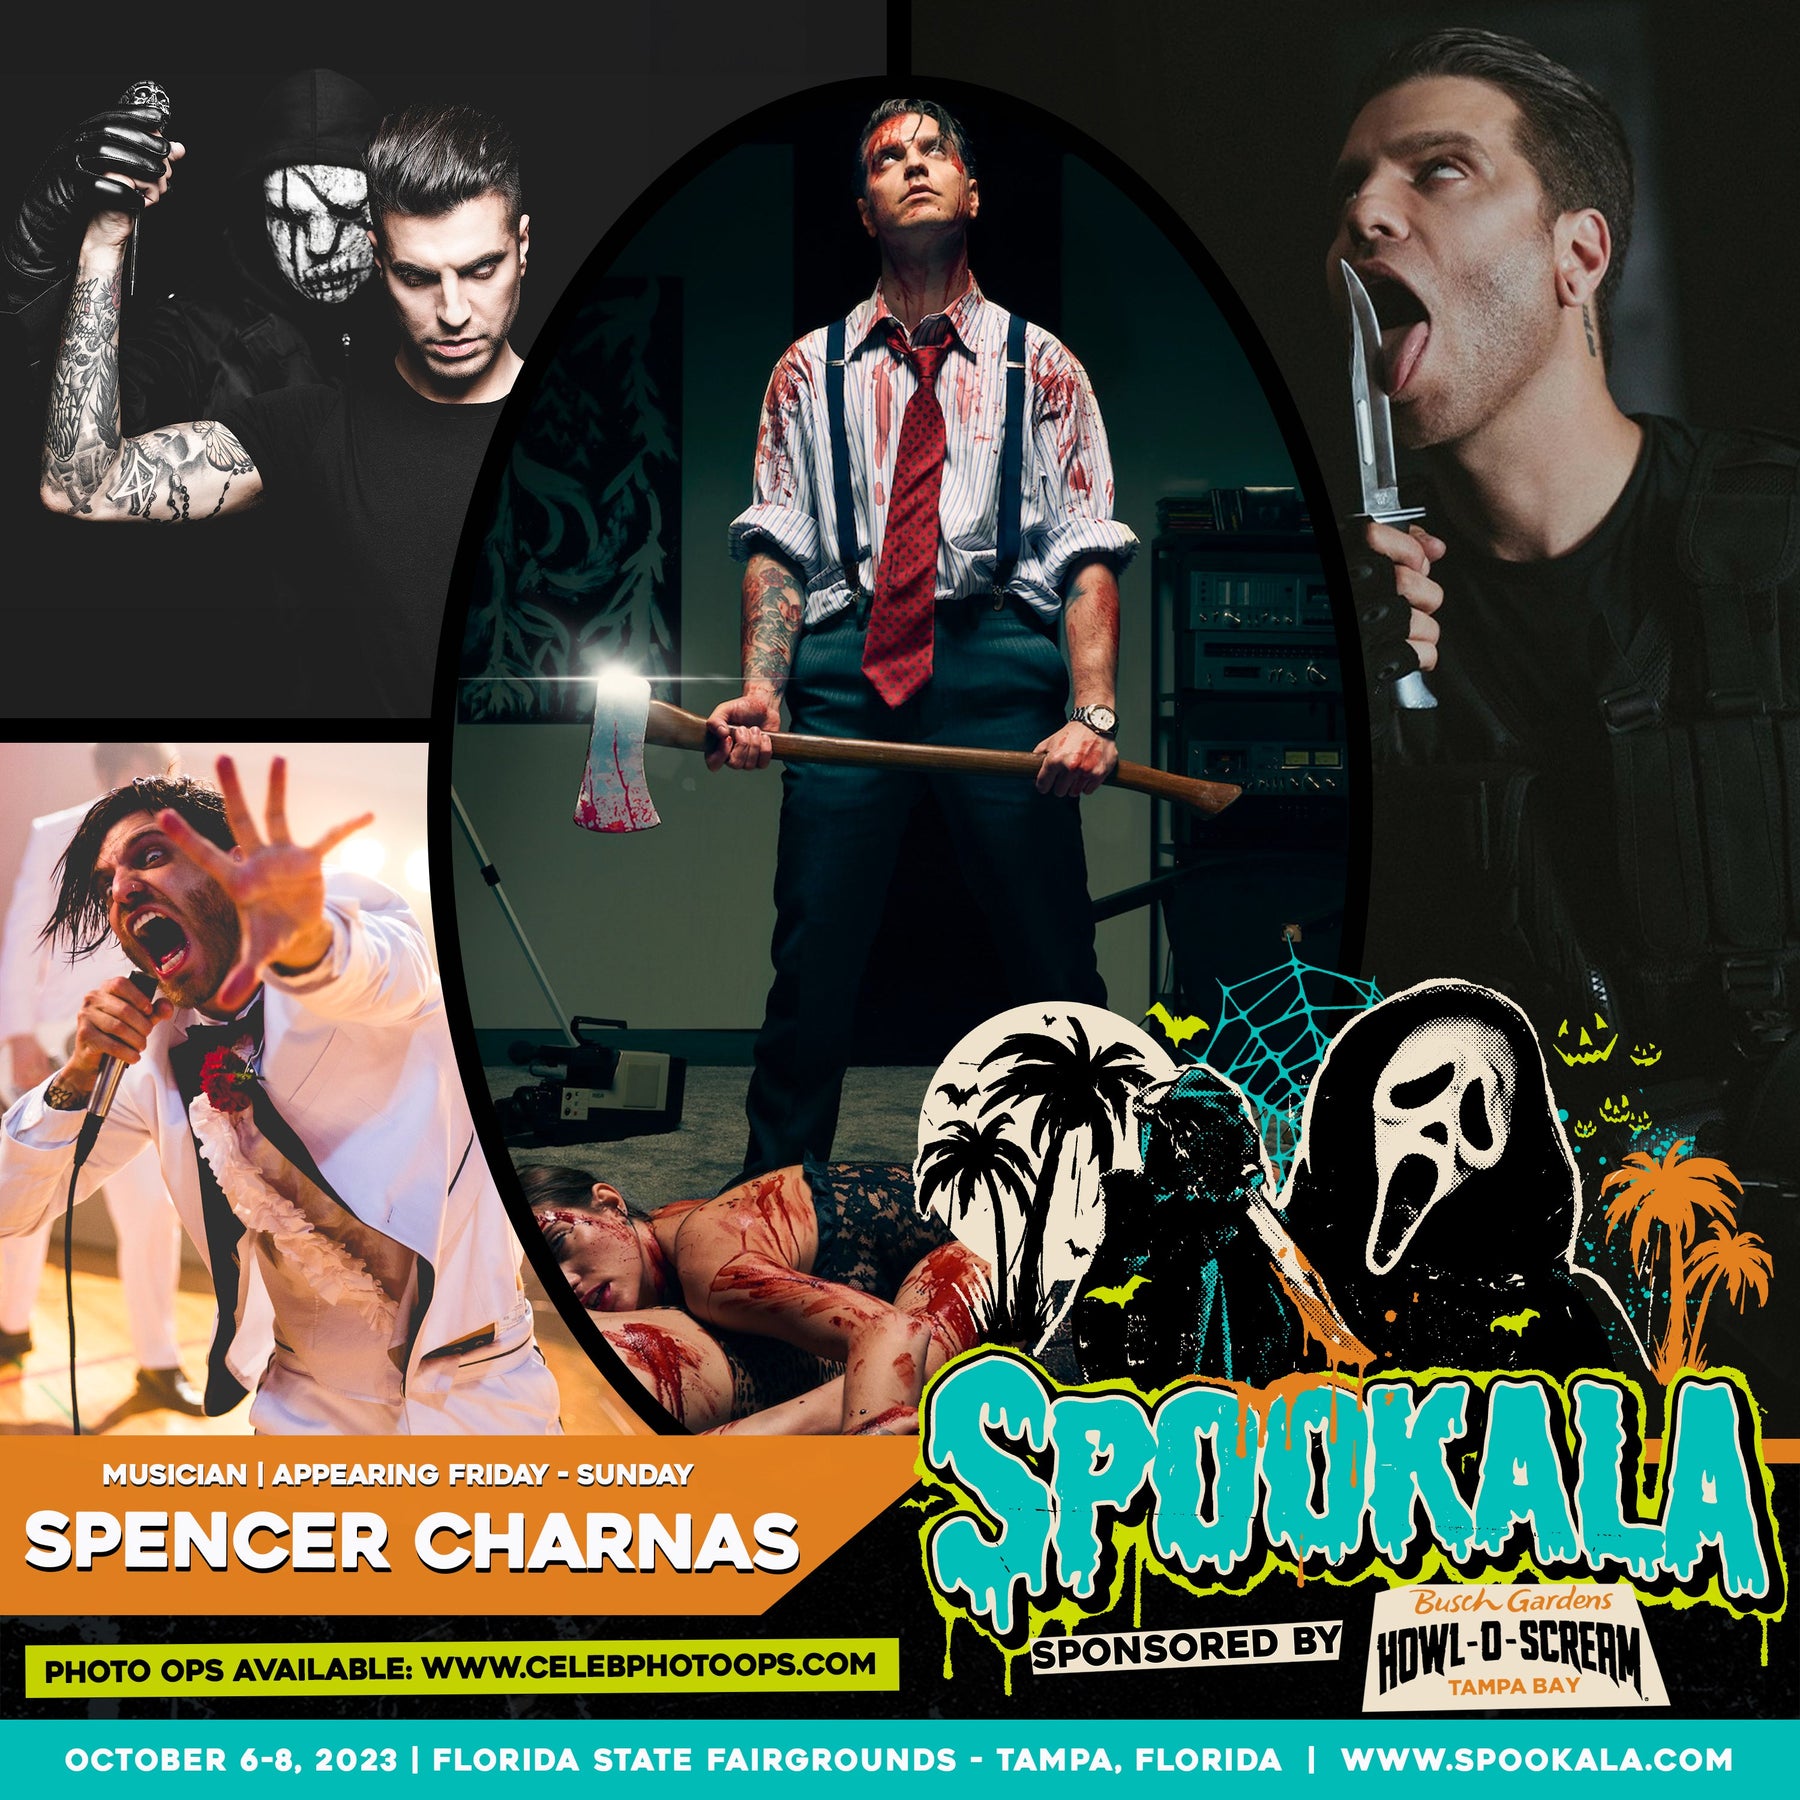 Spencer Charnas Official Autograph MailIn Service Spookala Tampa 20